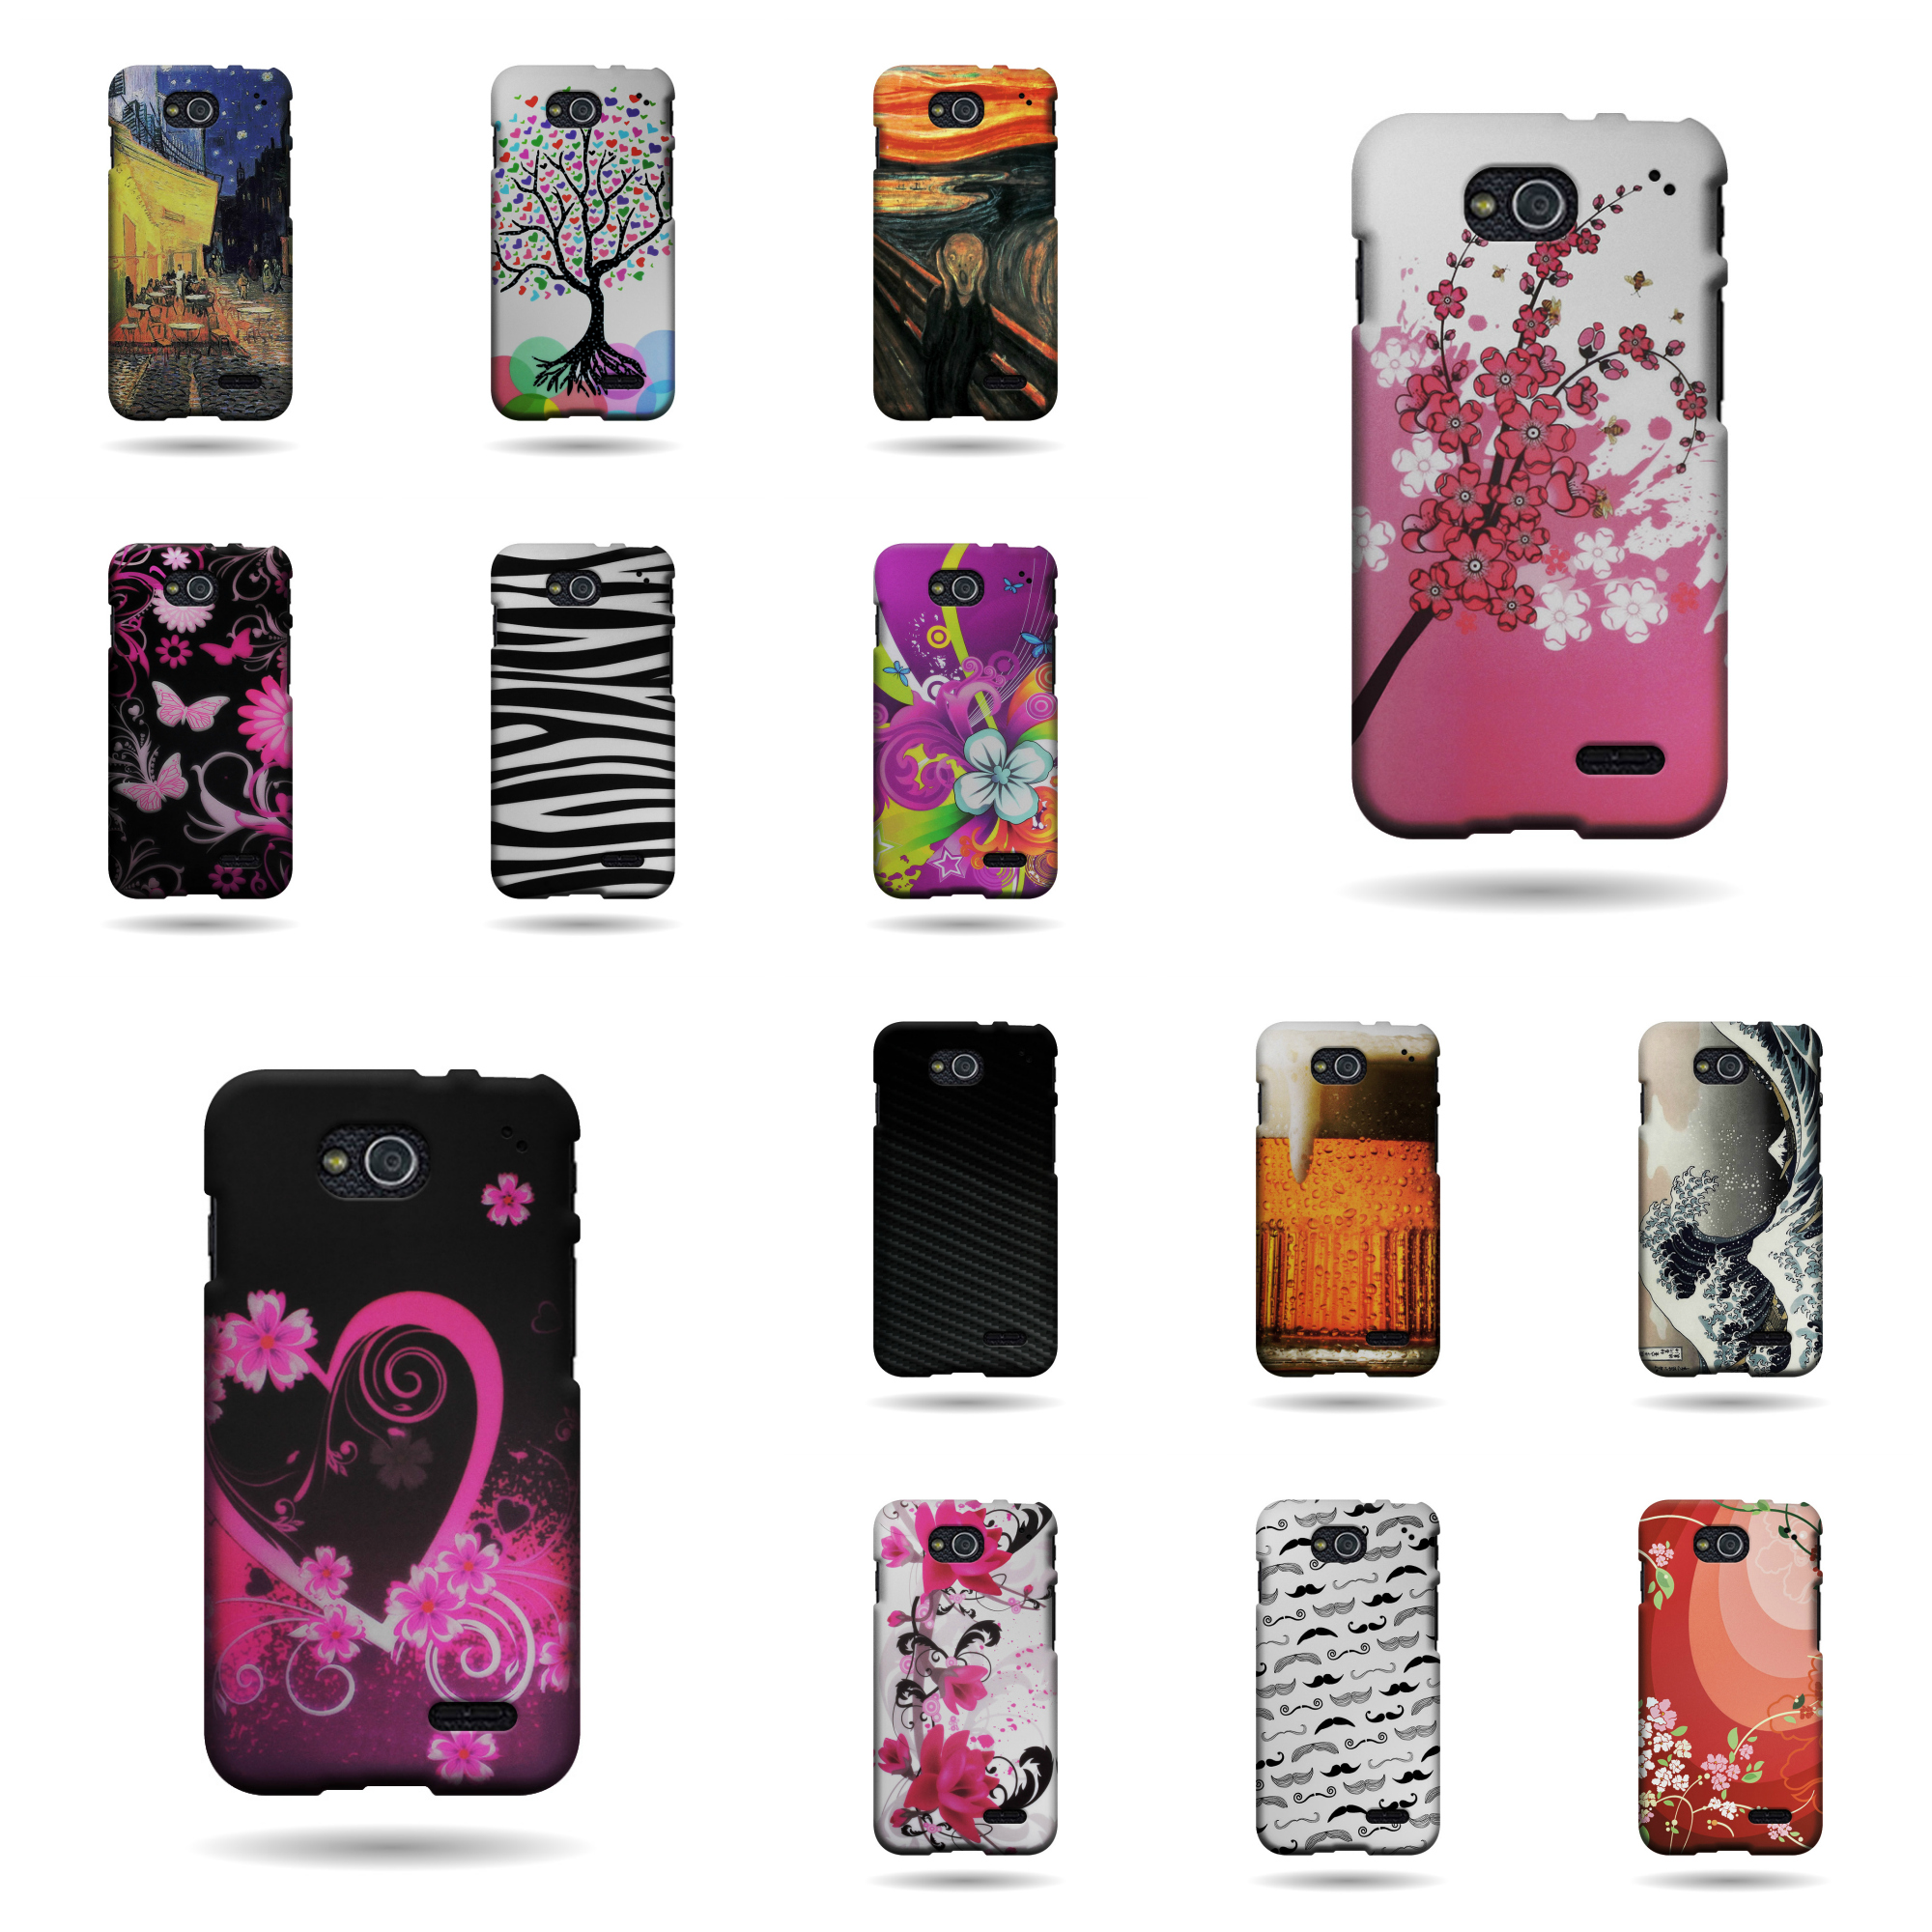 mobile phones covers and cases